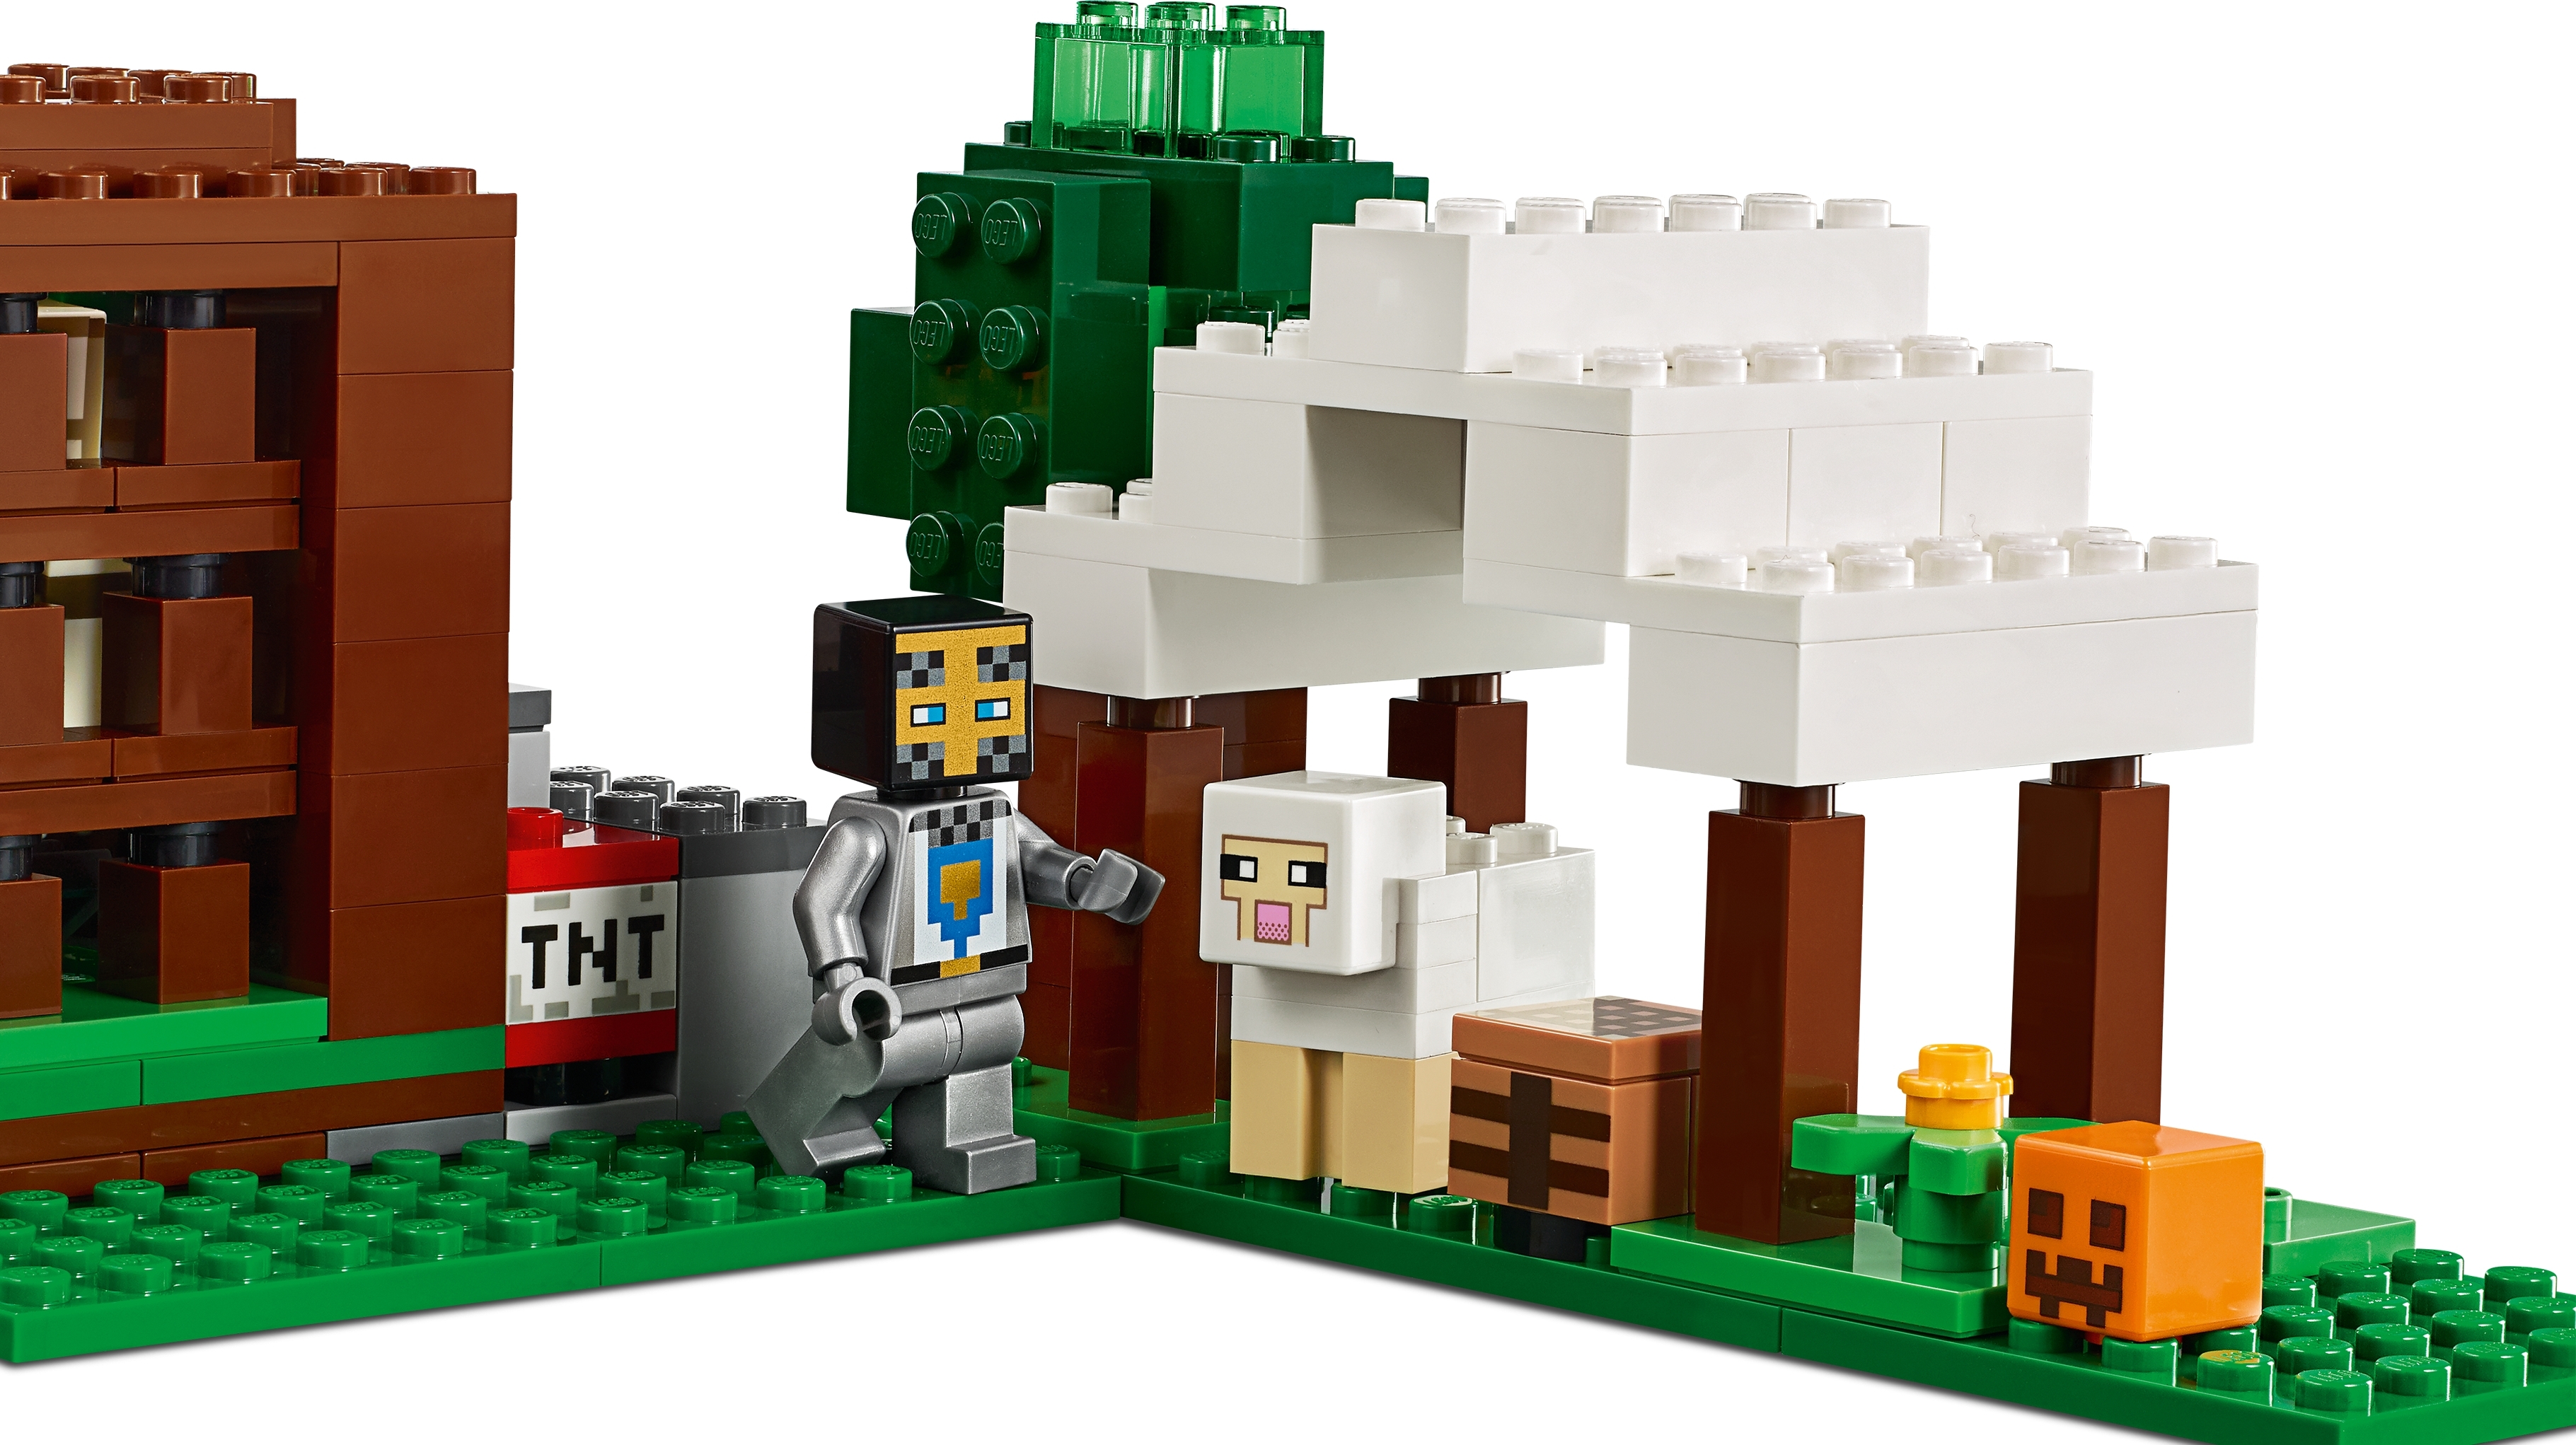 The Pillager Outpost Minecraft Buy Online At The Official Lego Shop Us